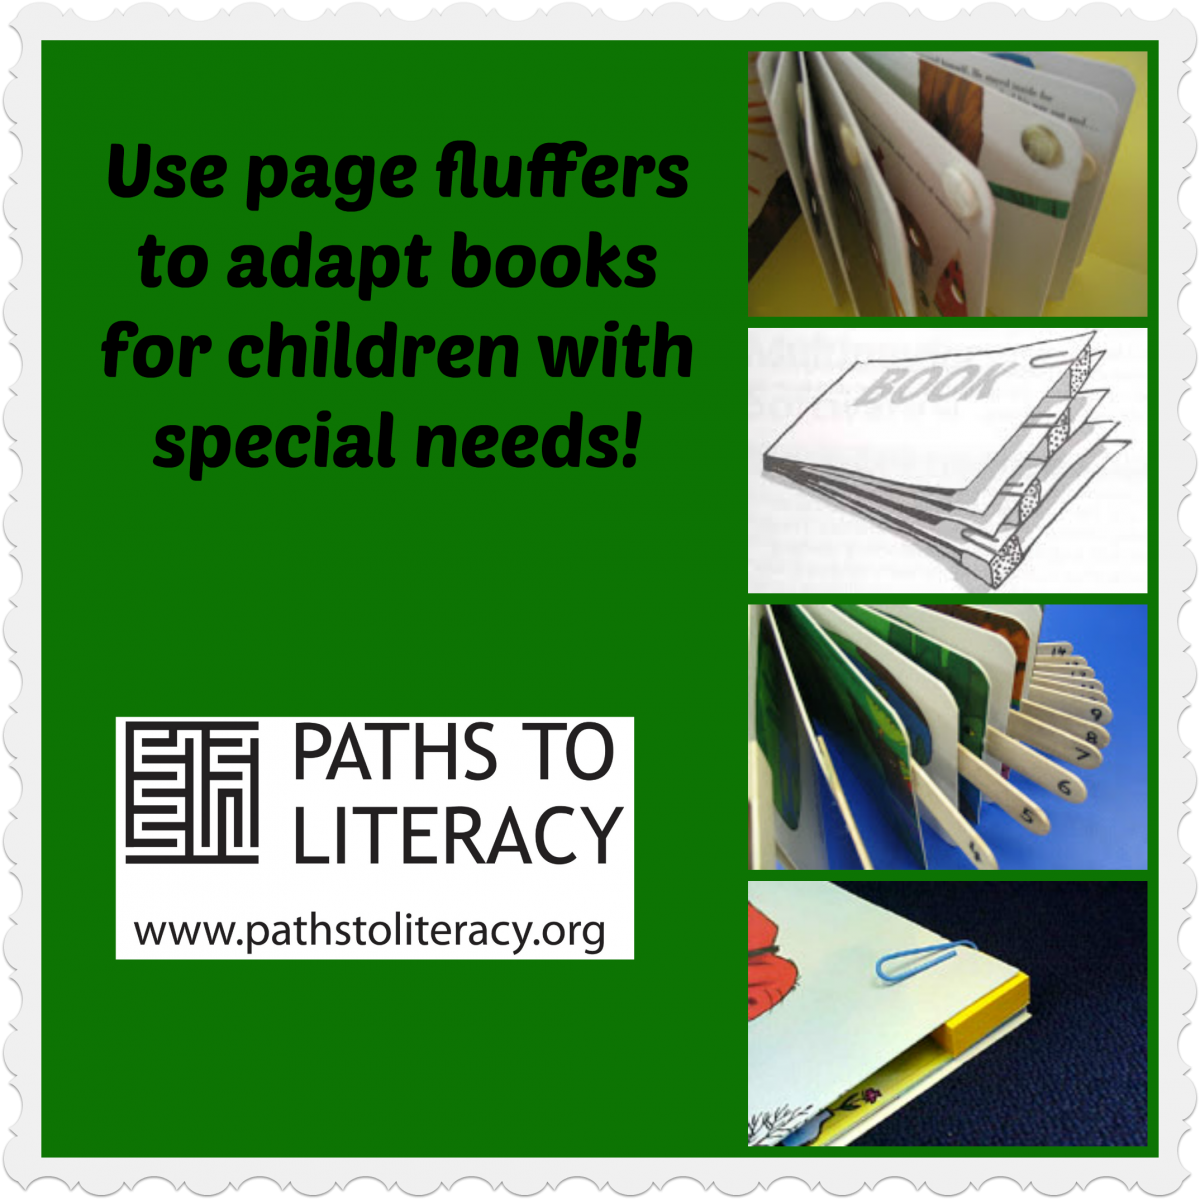 page fluffers to adapt books for children with special needs